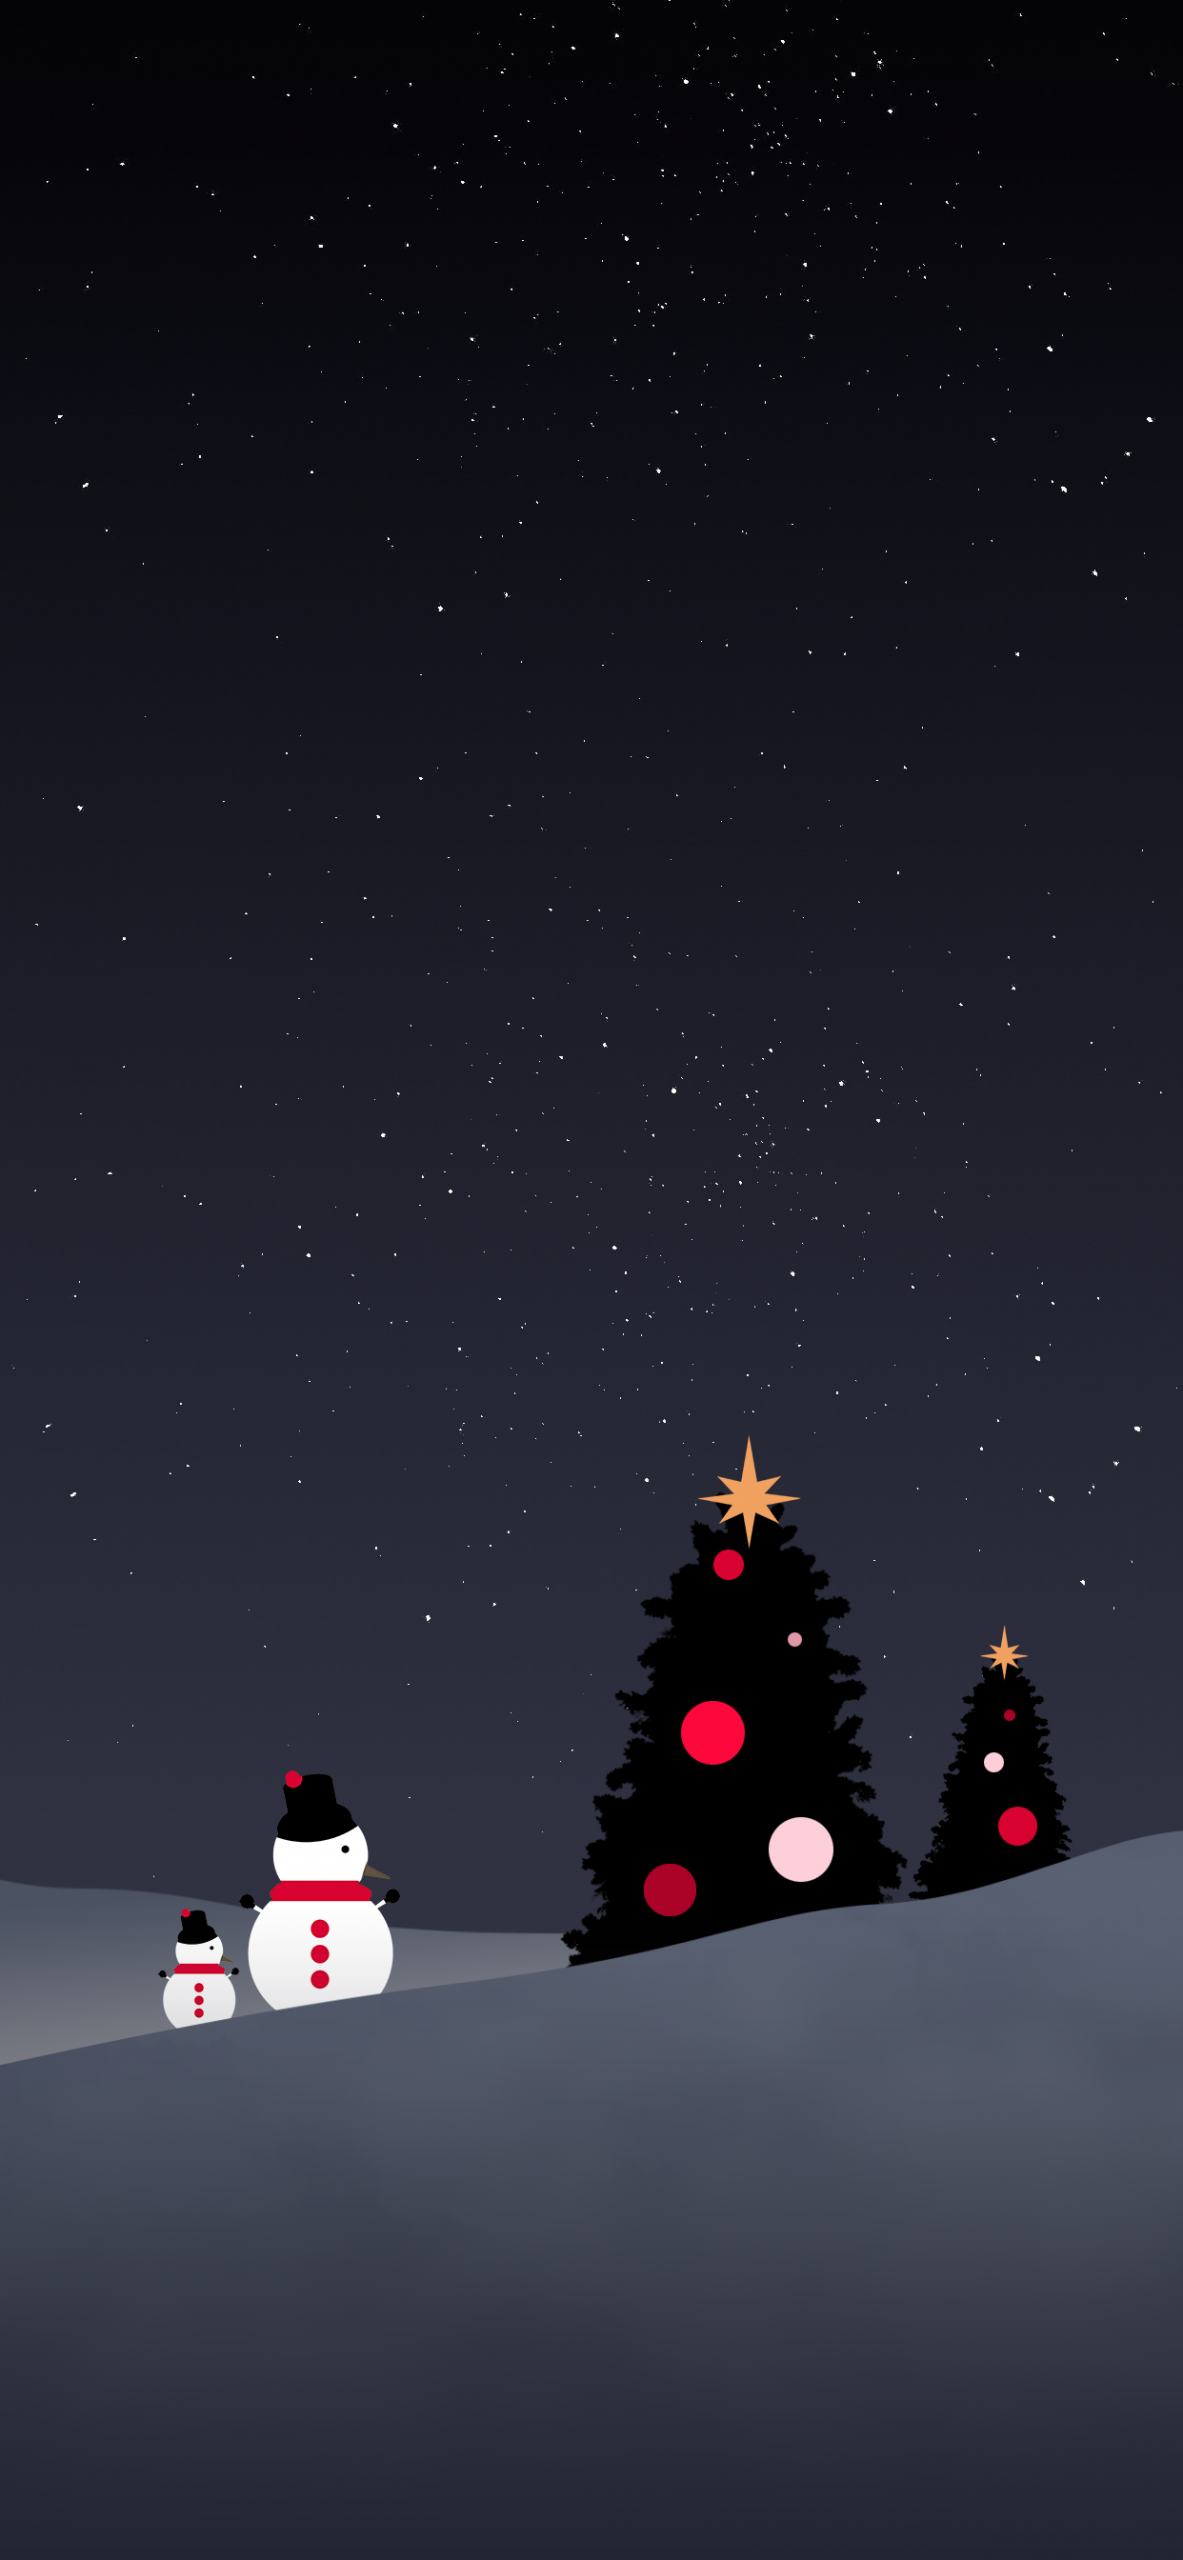 Merry Christmas wallpapers pack for iPhone